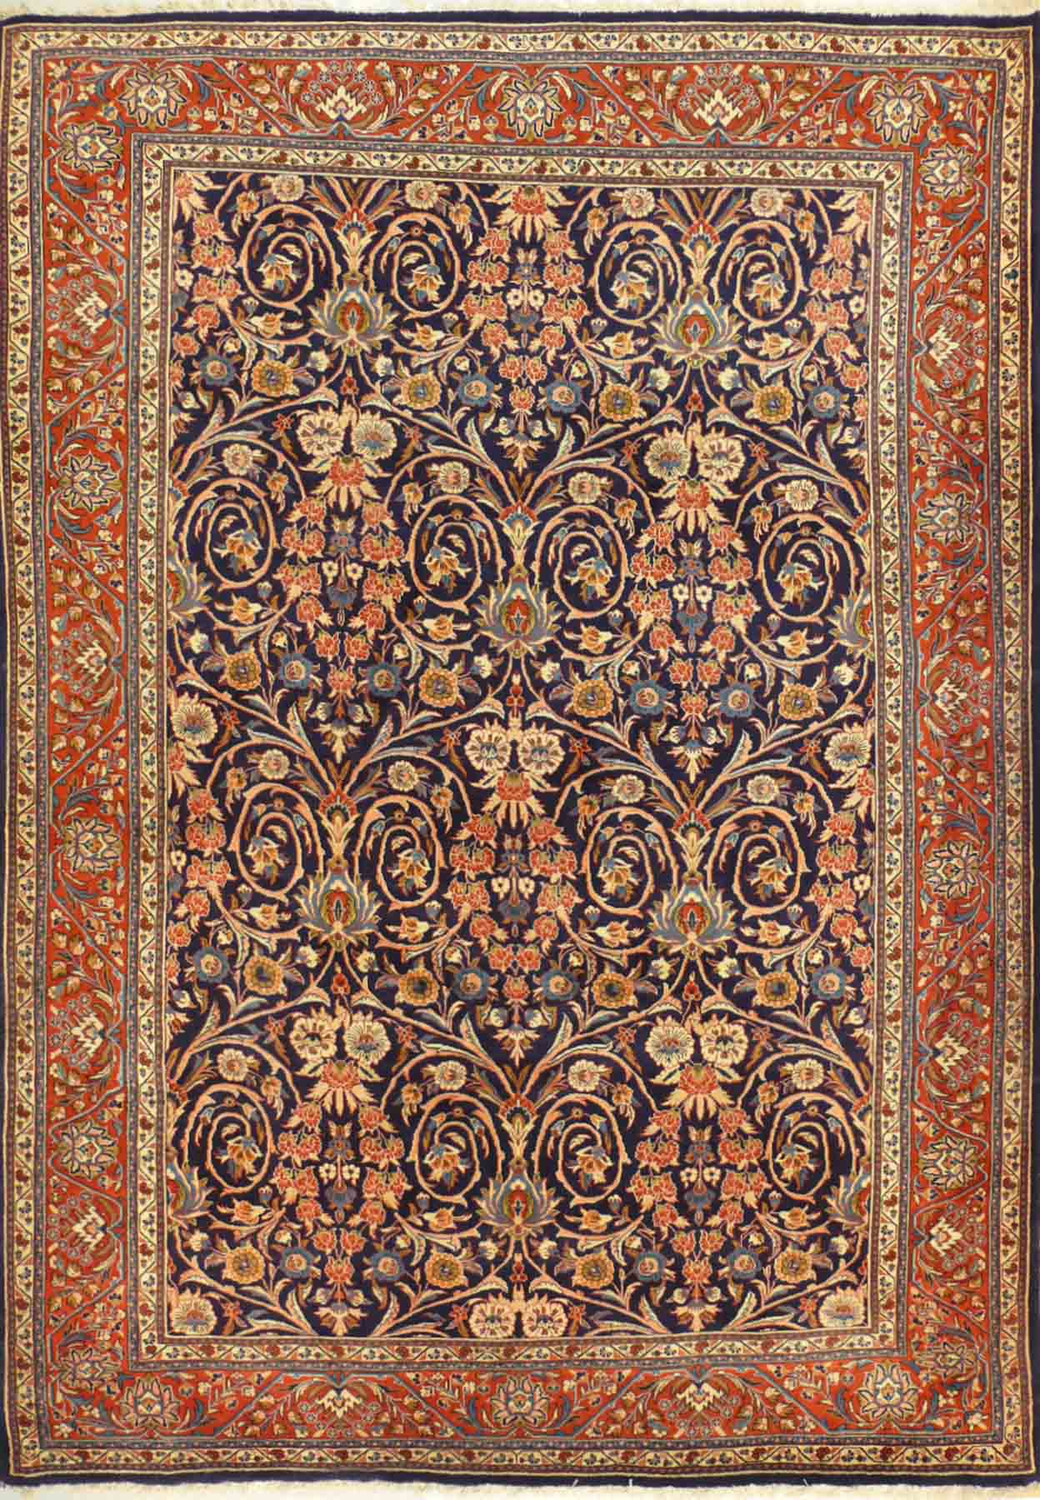 7'5 x 10'5 Persian Floral and All-Over Design Sarough Rug